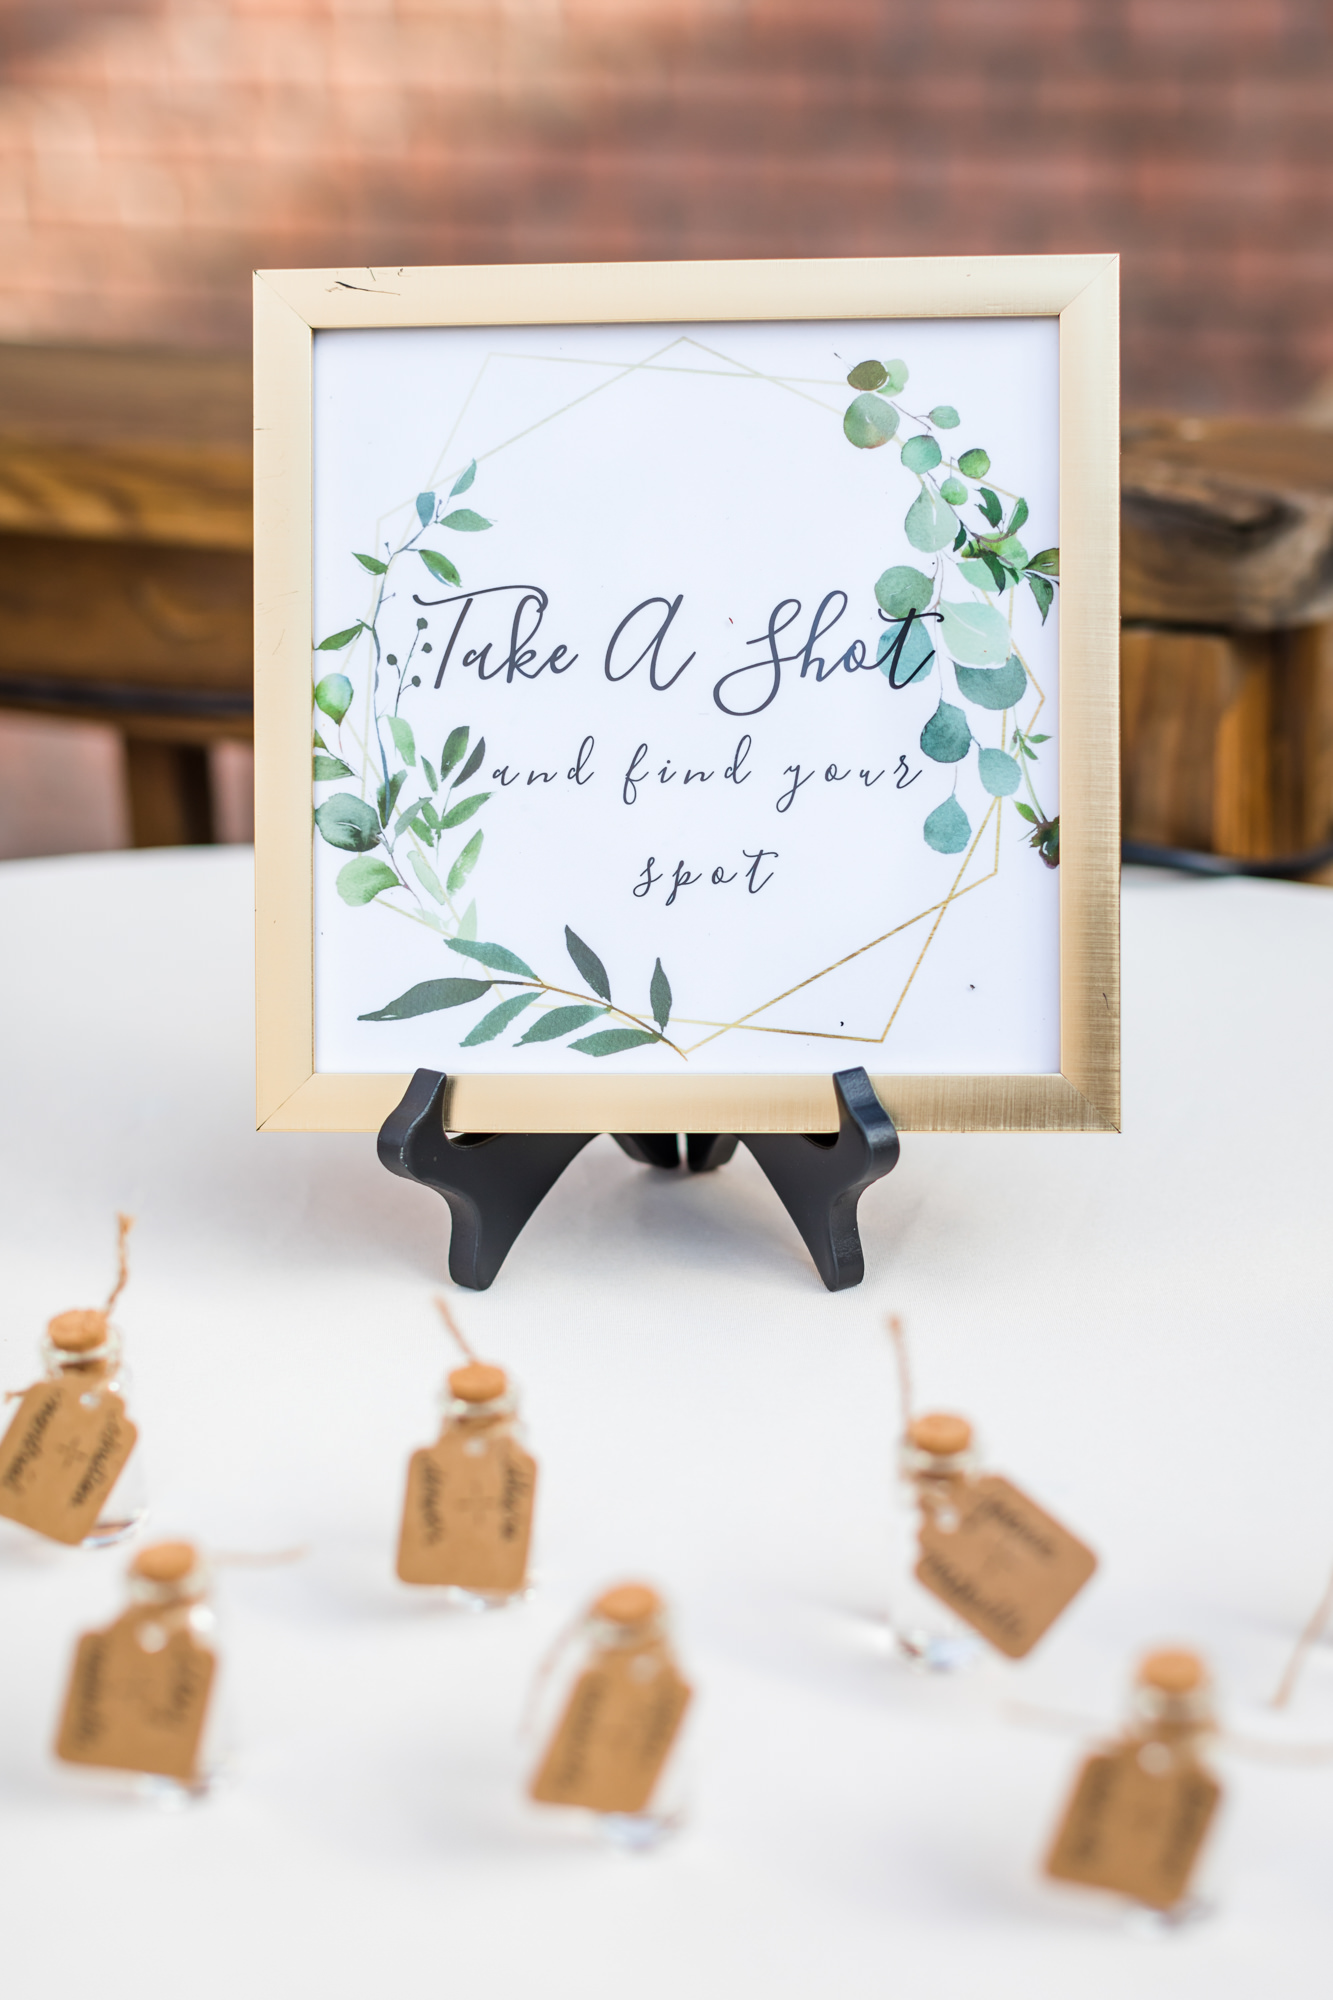 'take a shot' wedding sign with greenery and chic wedding reception